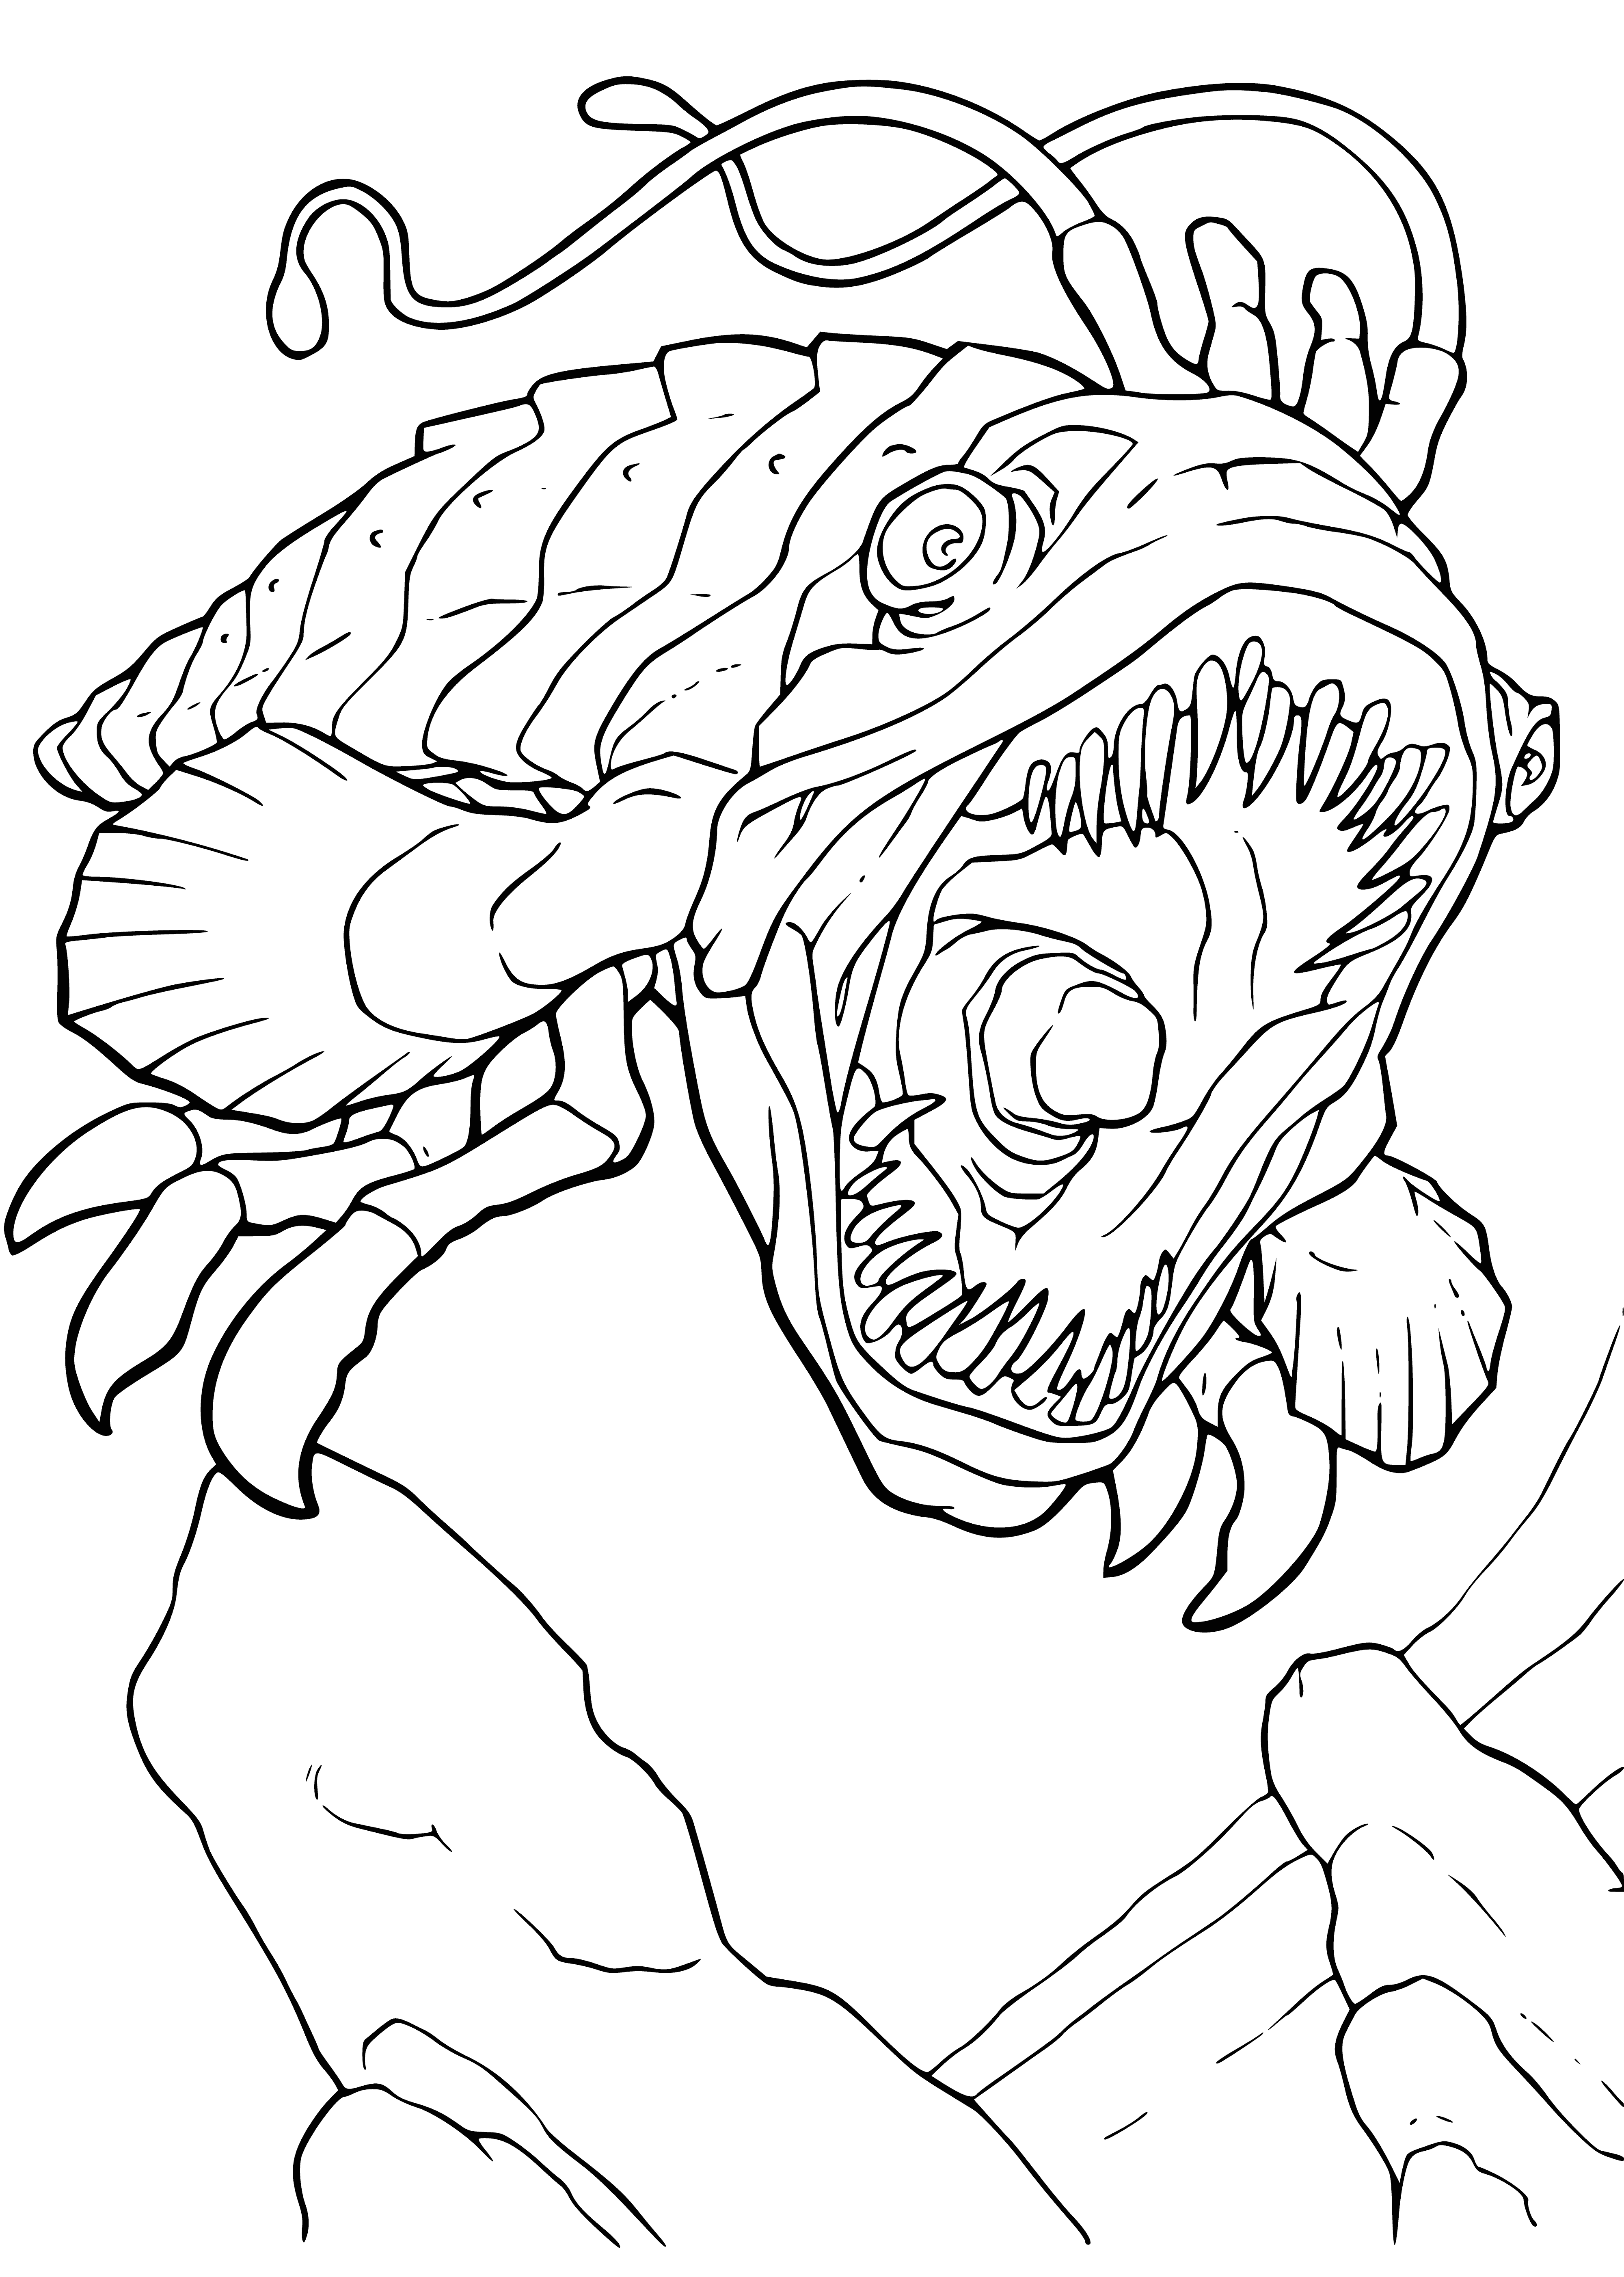 Underwater monster coloring page